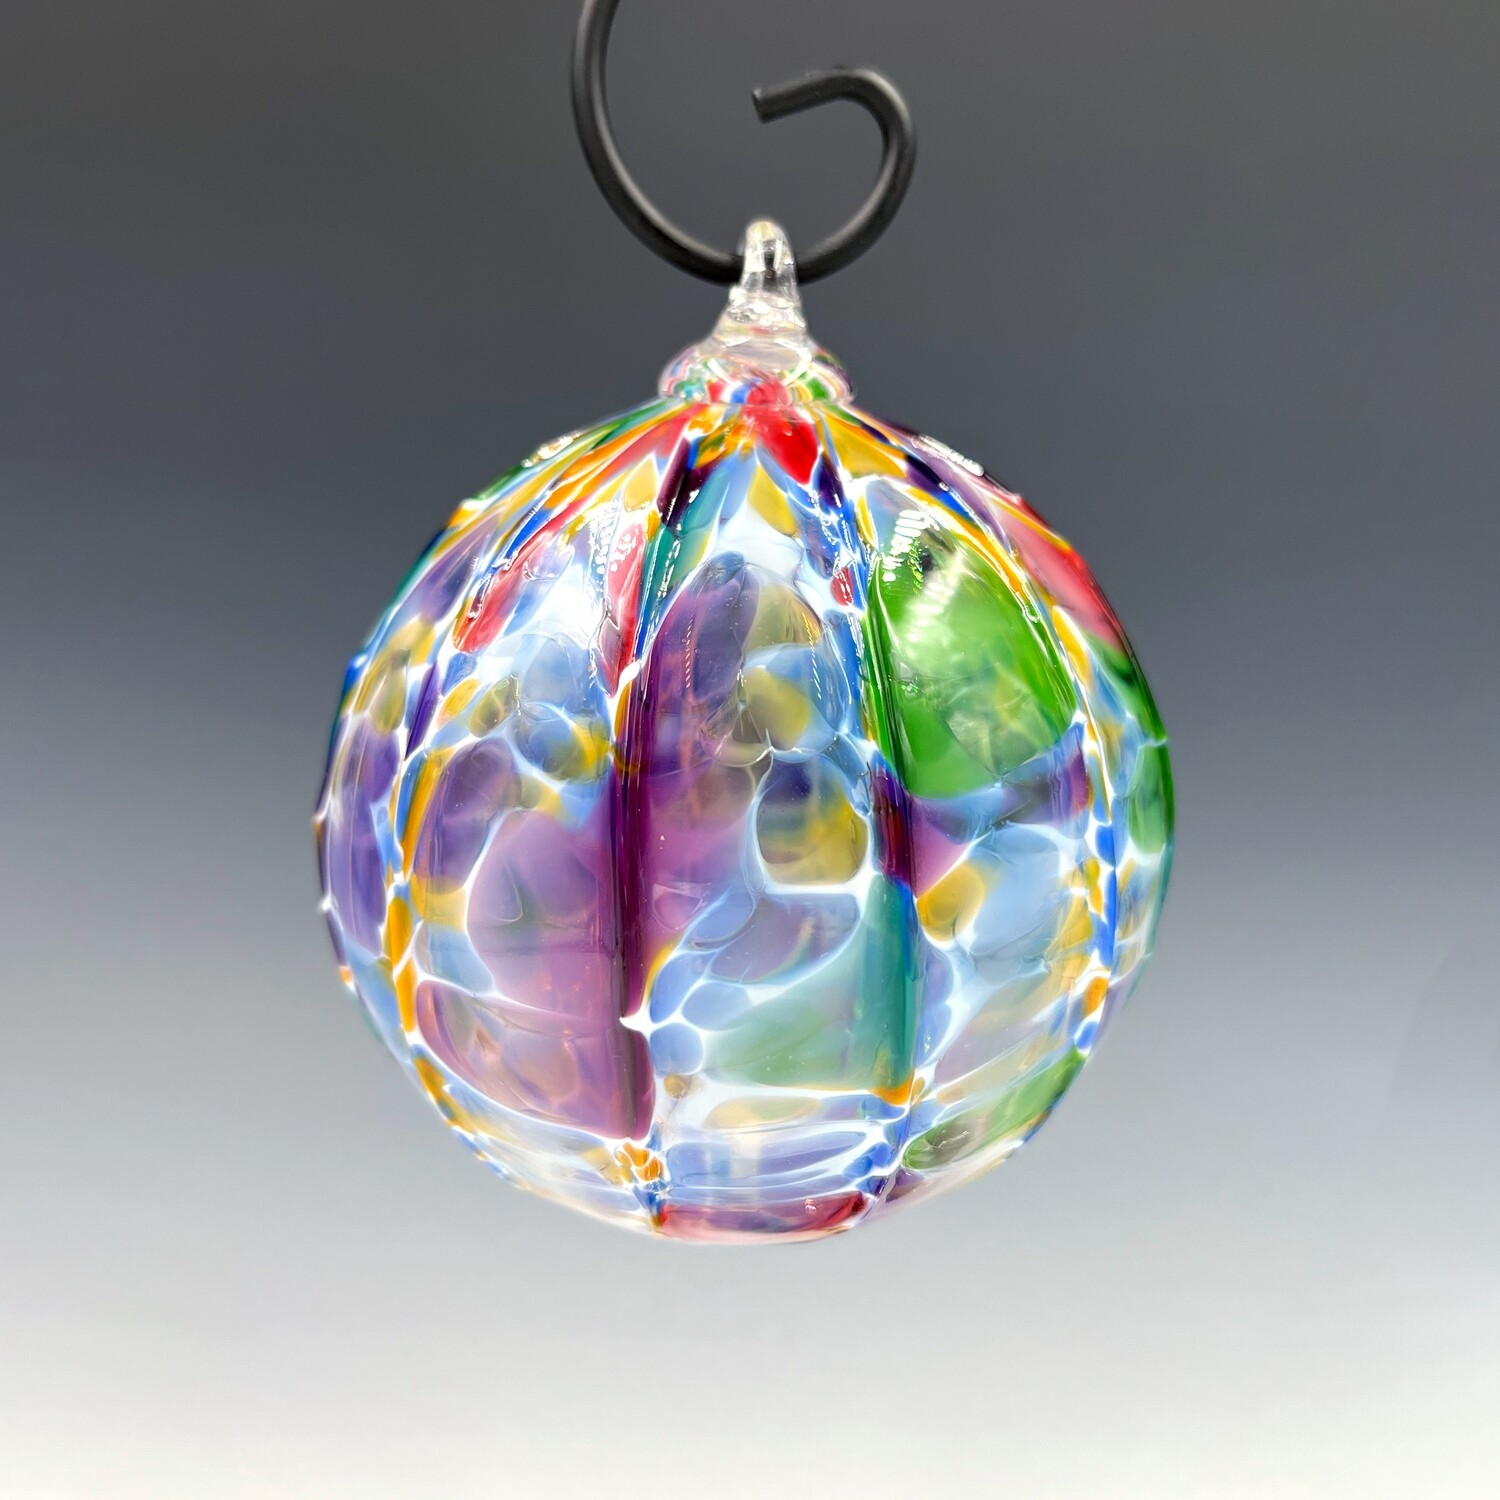 Glass Ornament in White Fruit Salad Mix